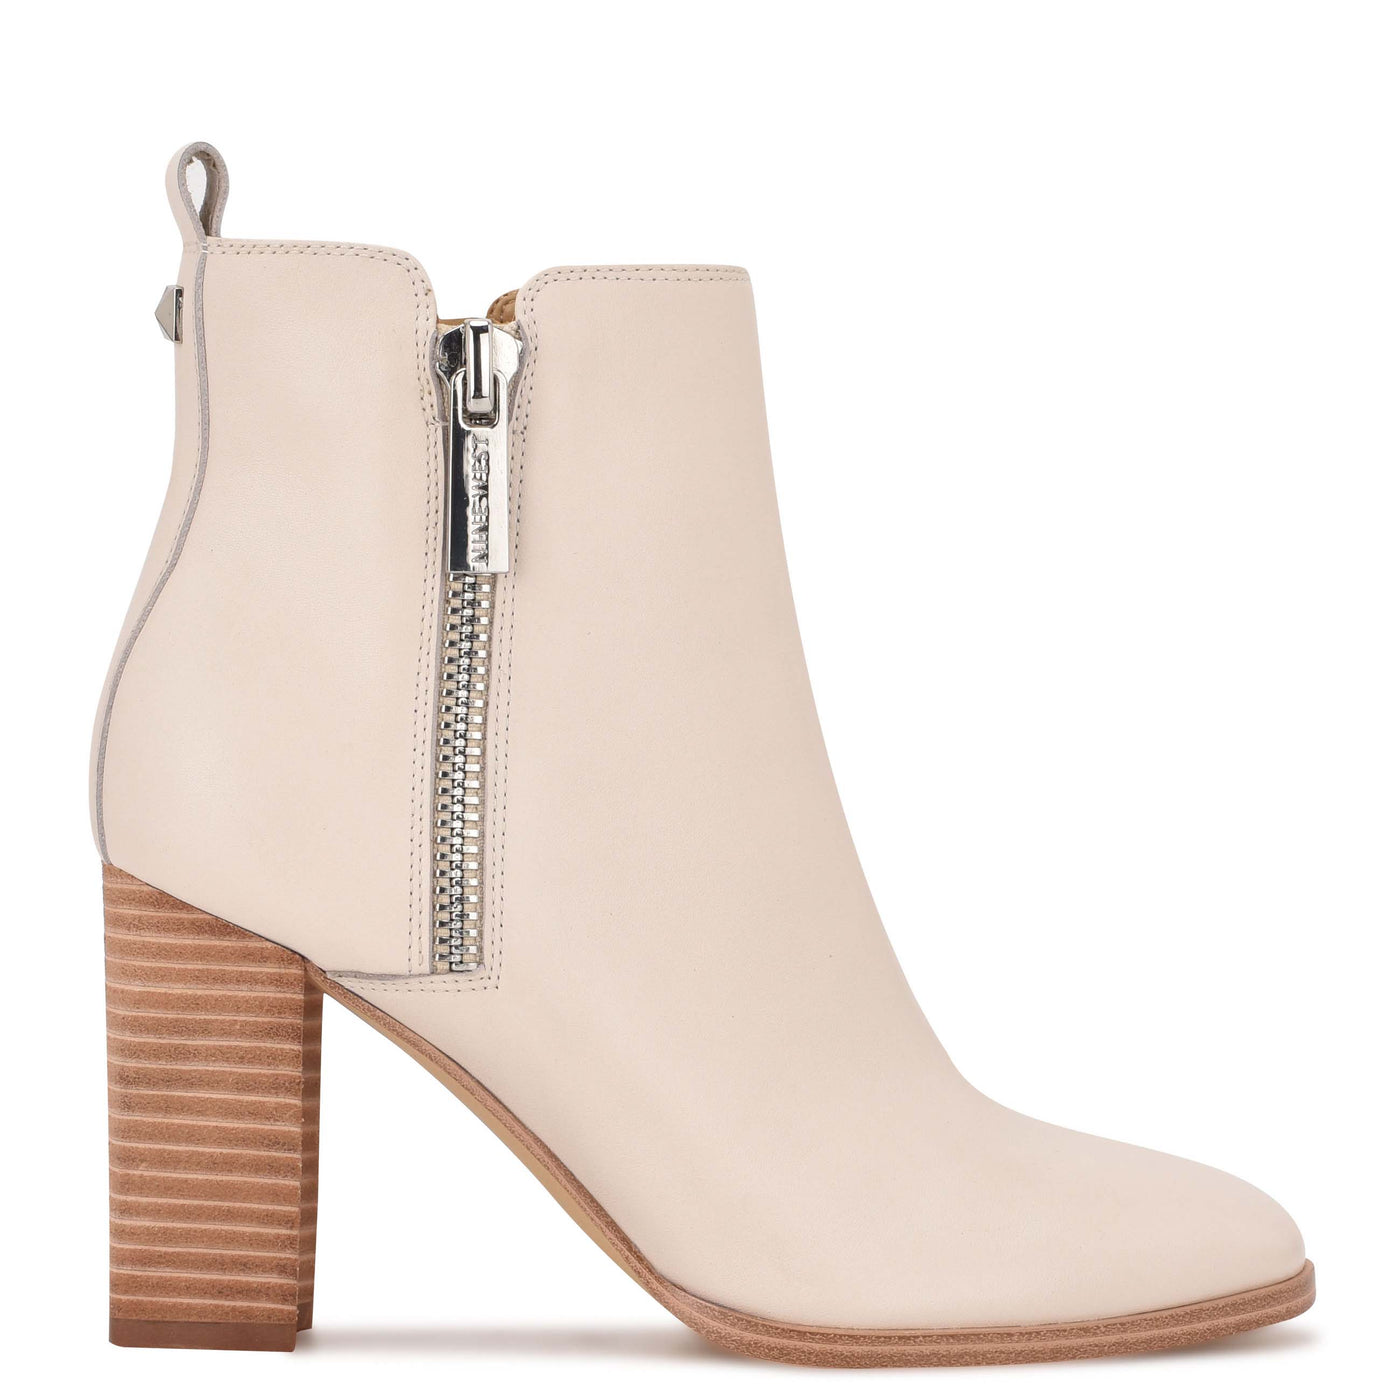 Boots & Booties | Nine West comfortable and fashionable shoes and ...